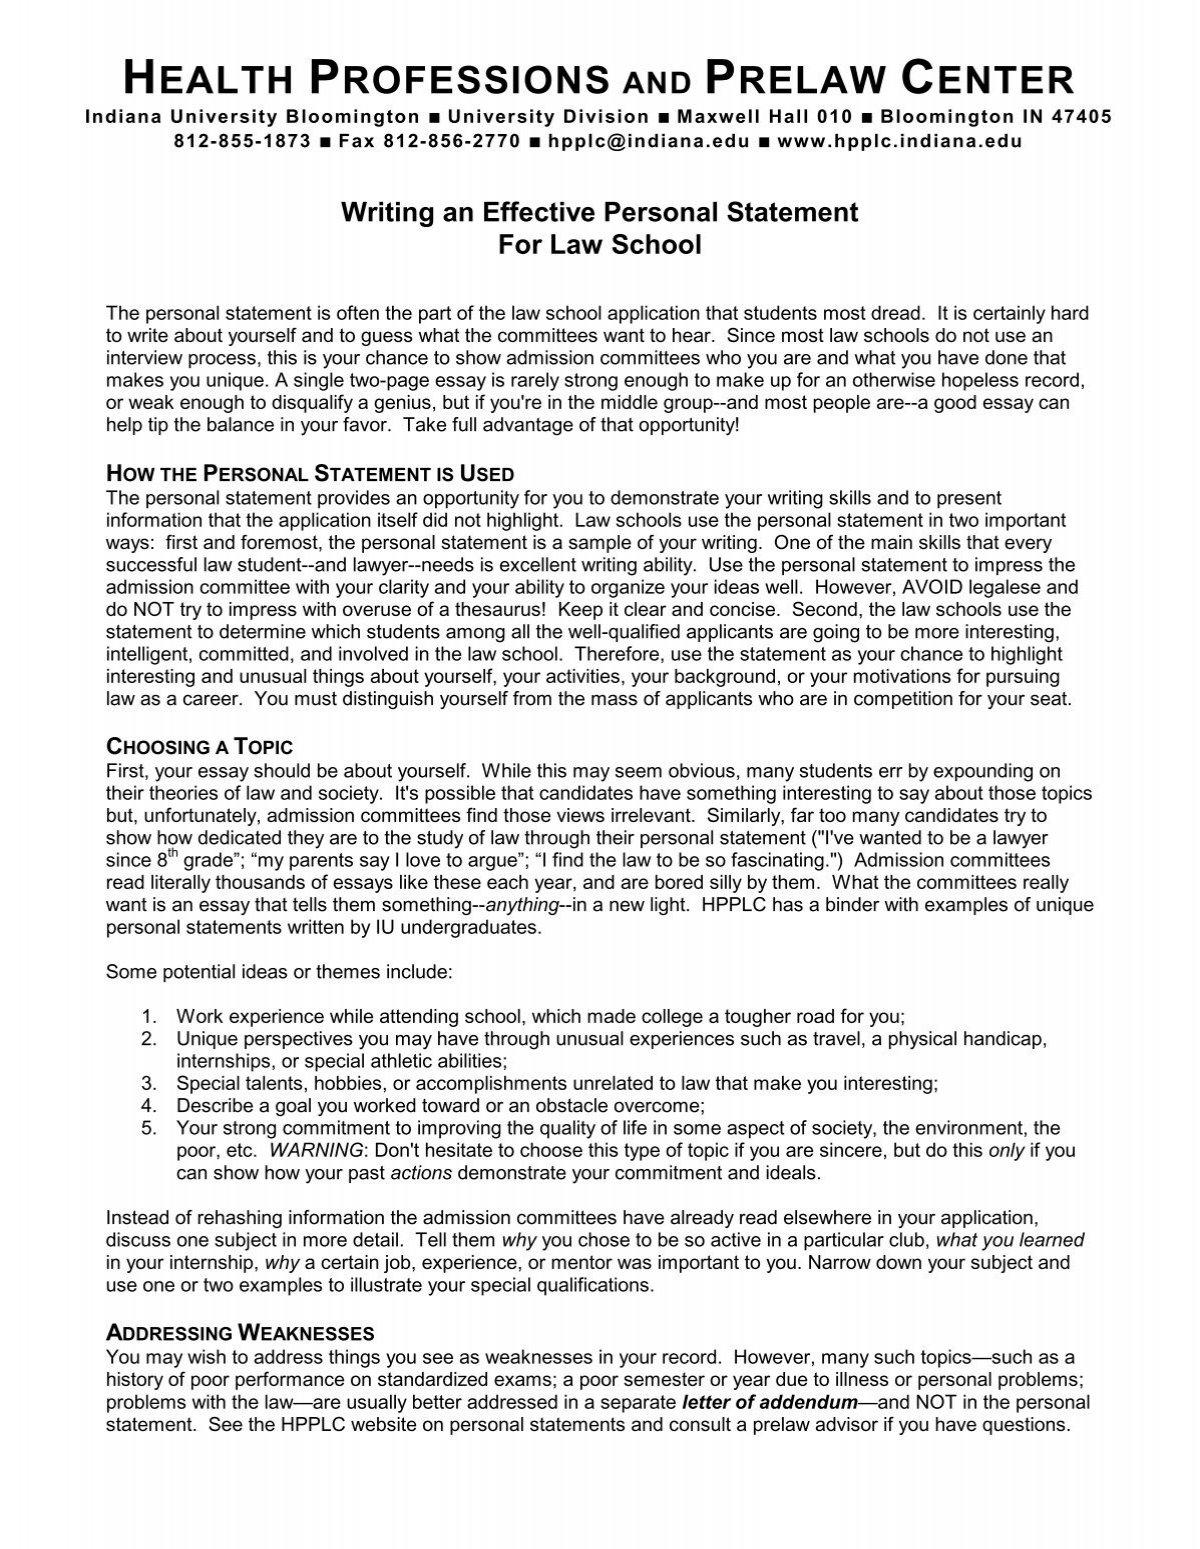 law school personal statement review service